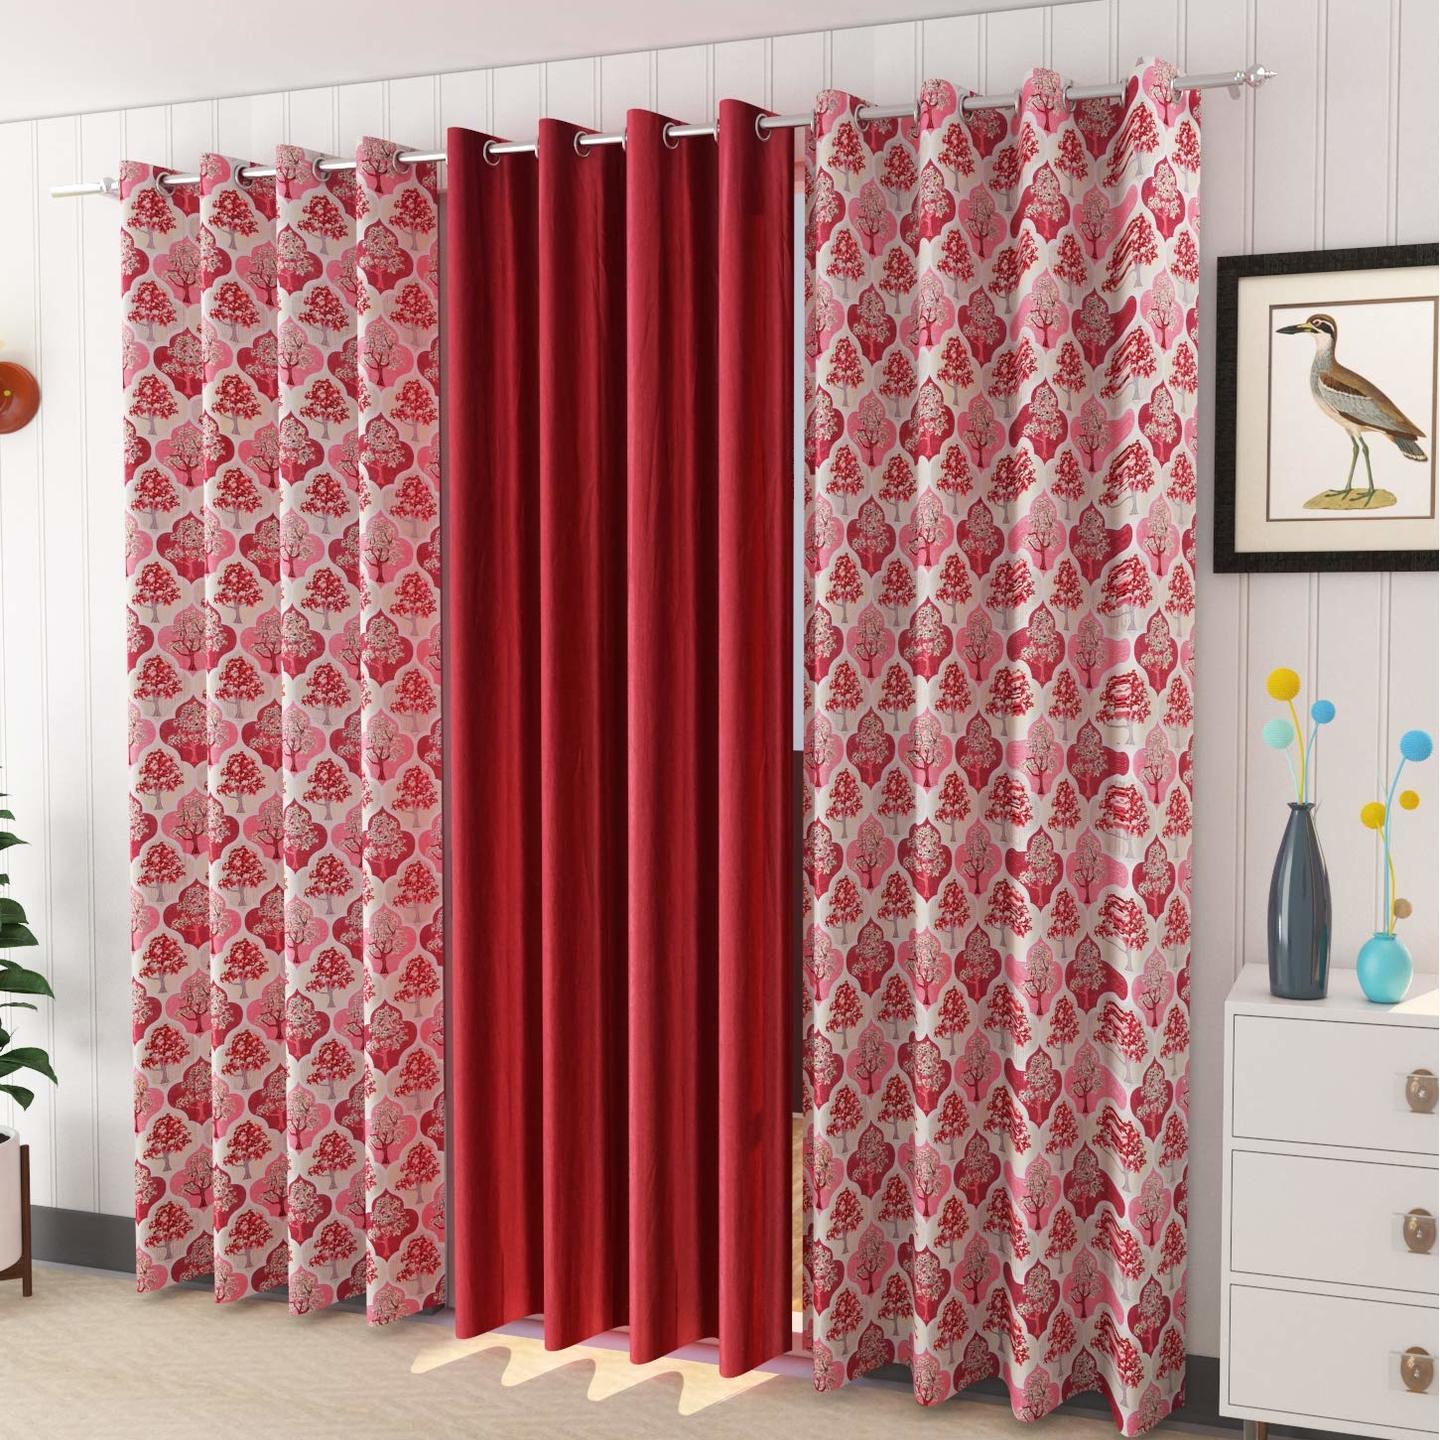 Handtex Home Curtains Polyester Tree Printed Set of 3 Pcs Maroon (2Tree+1 Plain) Size for Door 4 Feet x 7 Feet